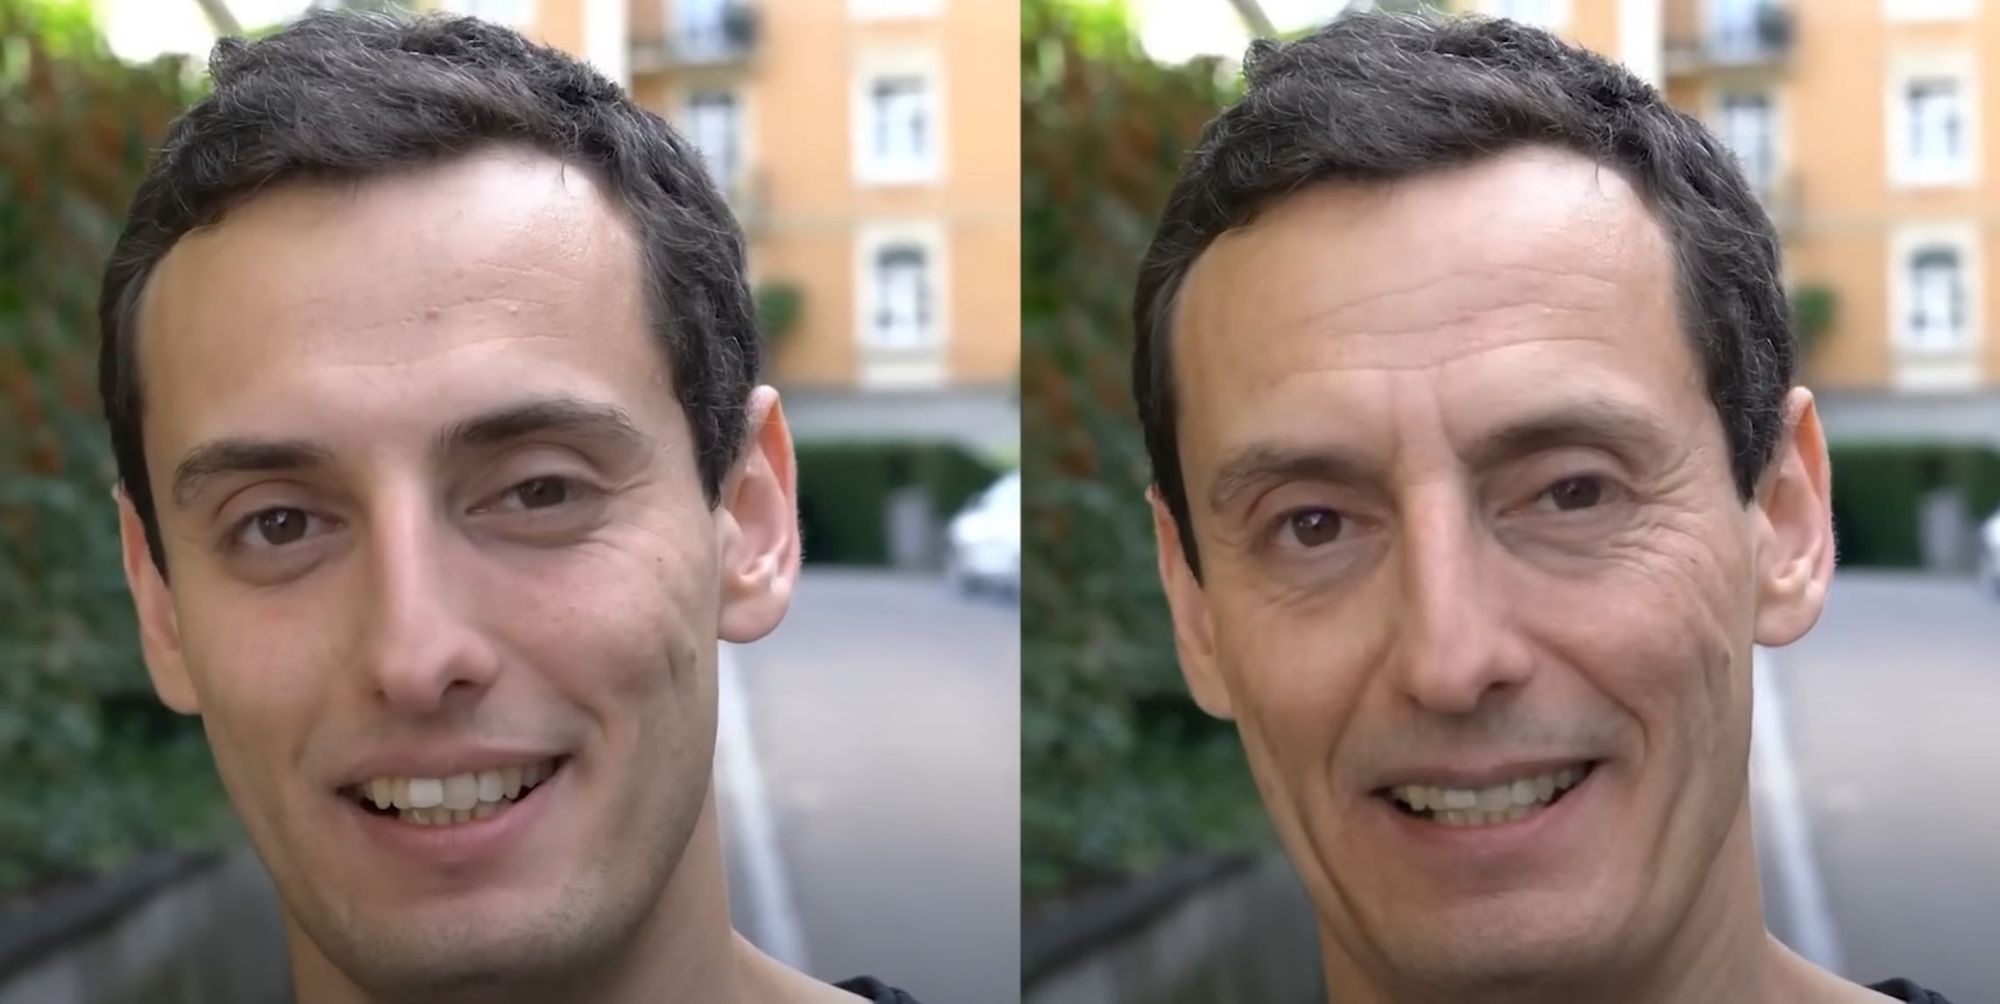 How Disney Creates An AI Tool To Make Actors Look Younger Or Older In Video